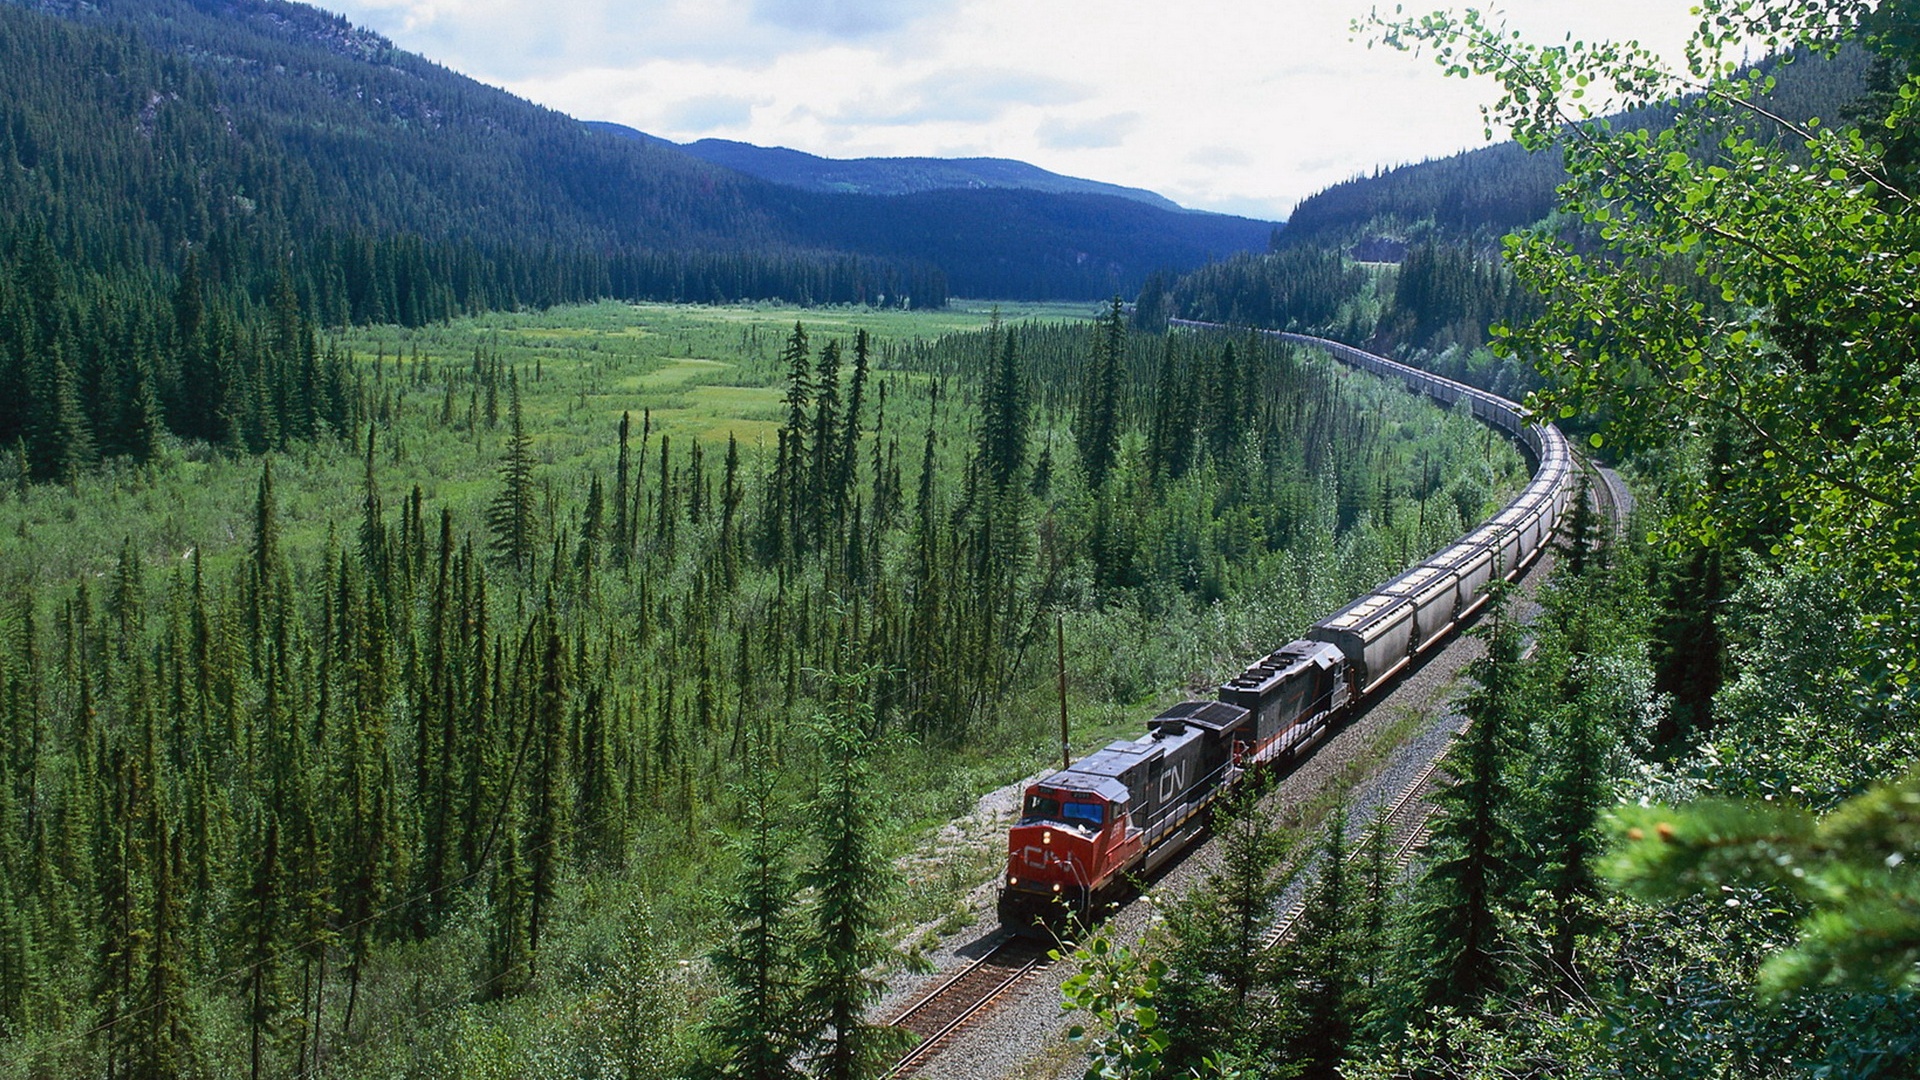 Amazing Train Pictures From Around The World